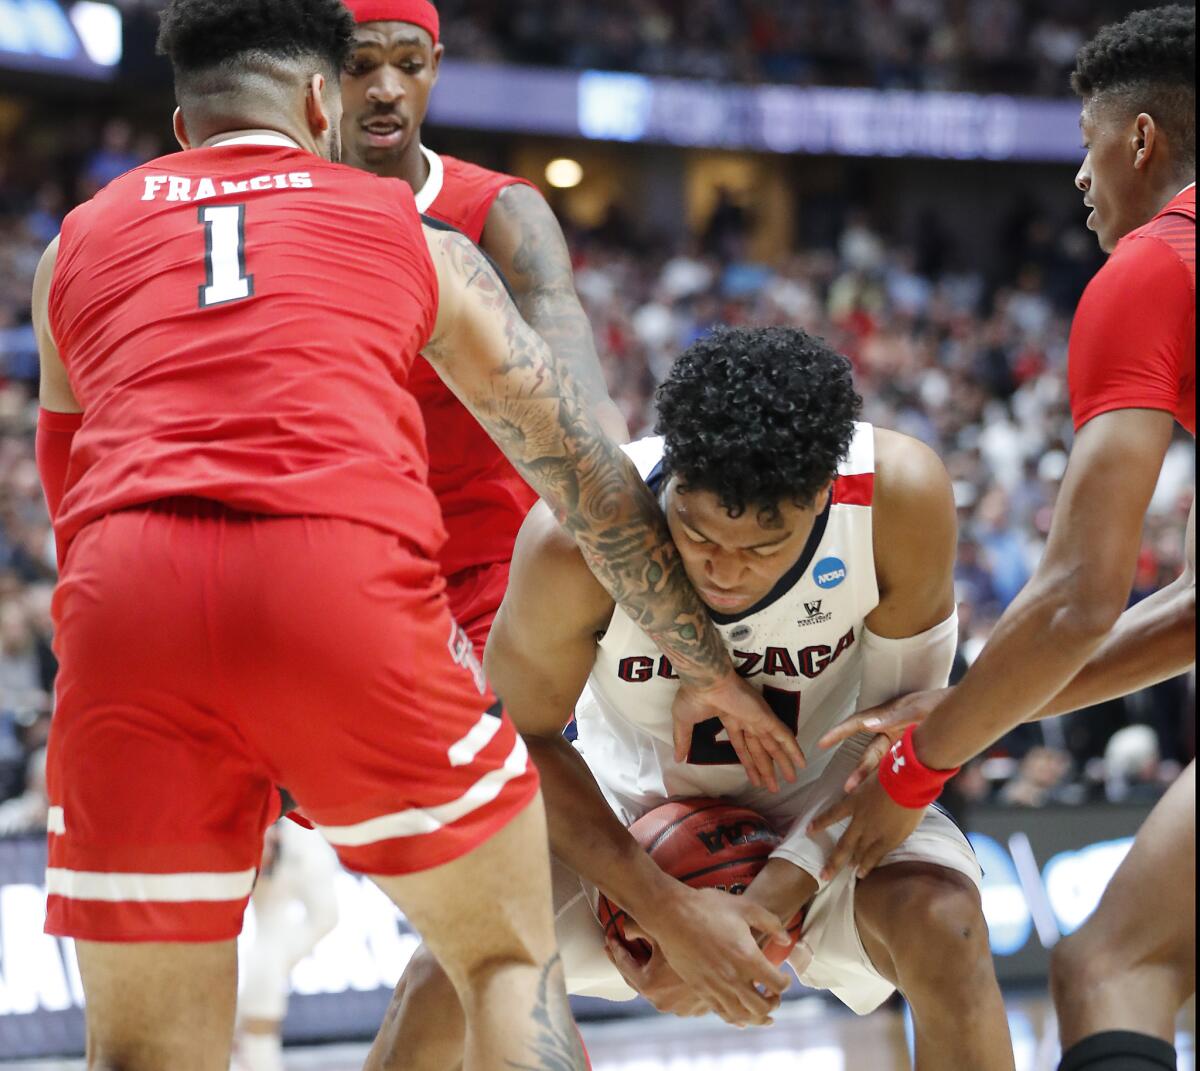 Gonzaga forward Rui Hachimuira gets hemmed in by Texas Tech defenders in the second half of the NCAA tournament West Regional Final at Honda Center on Saturday.